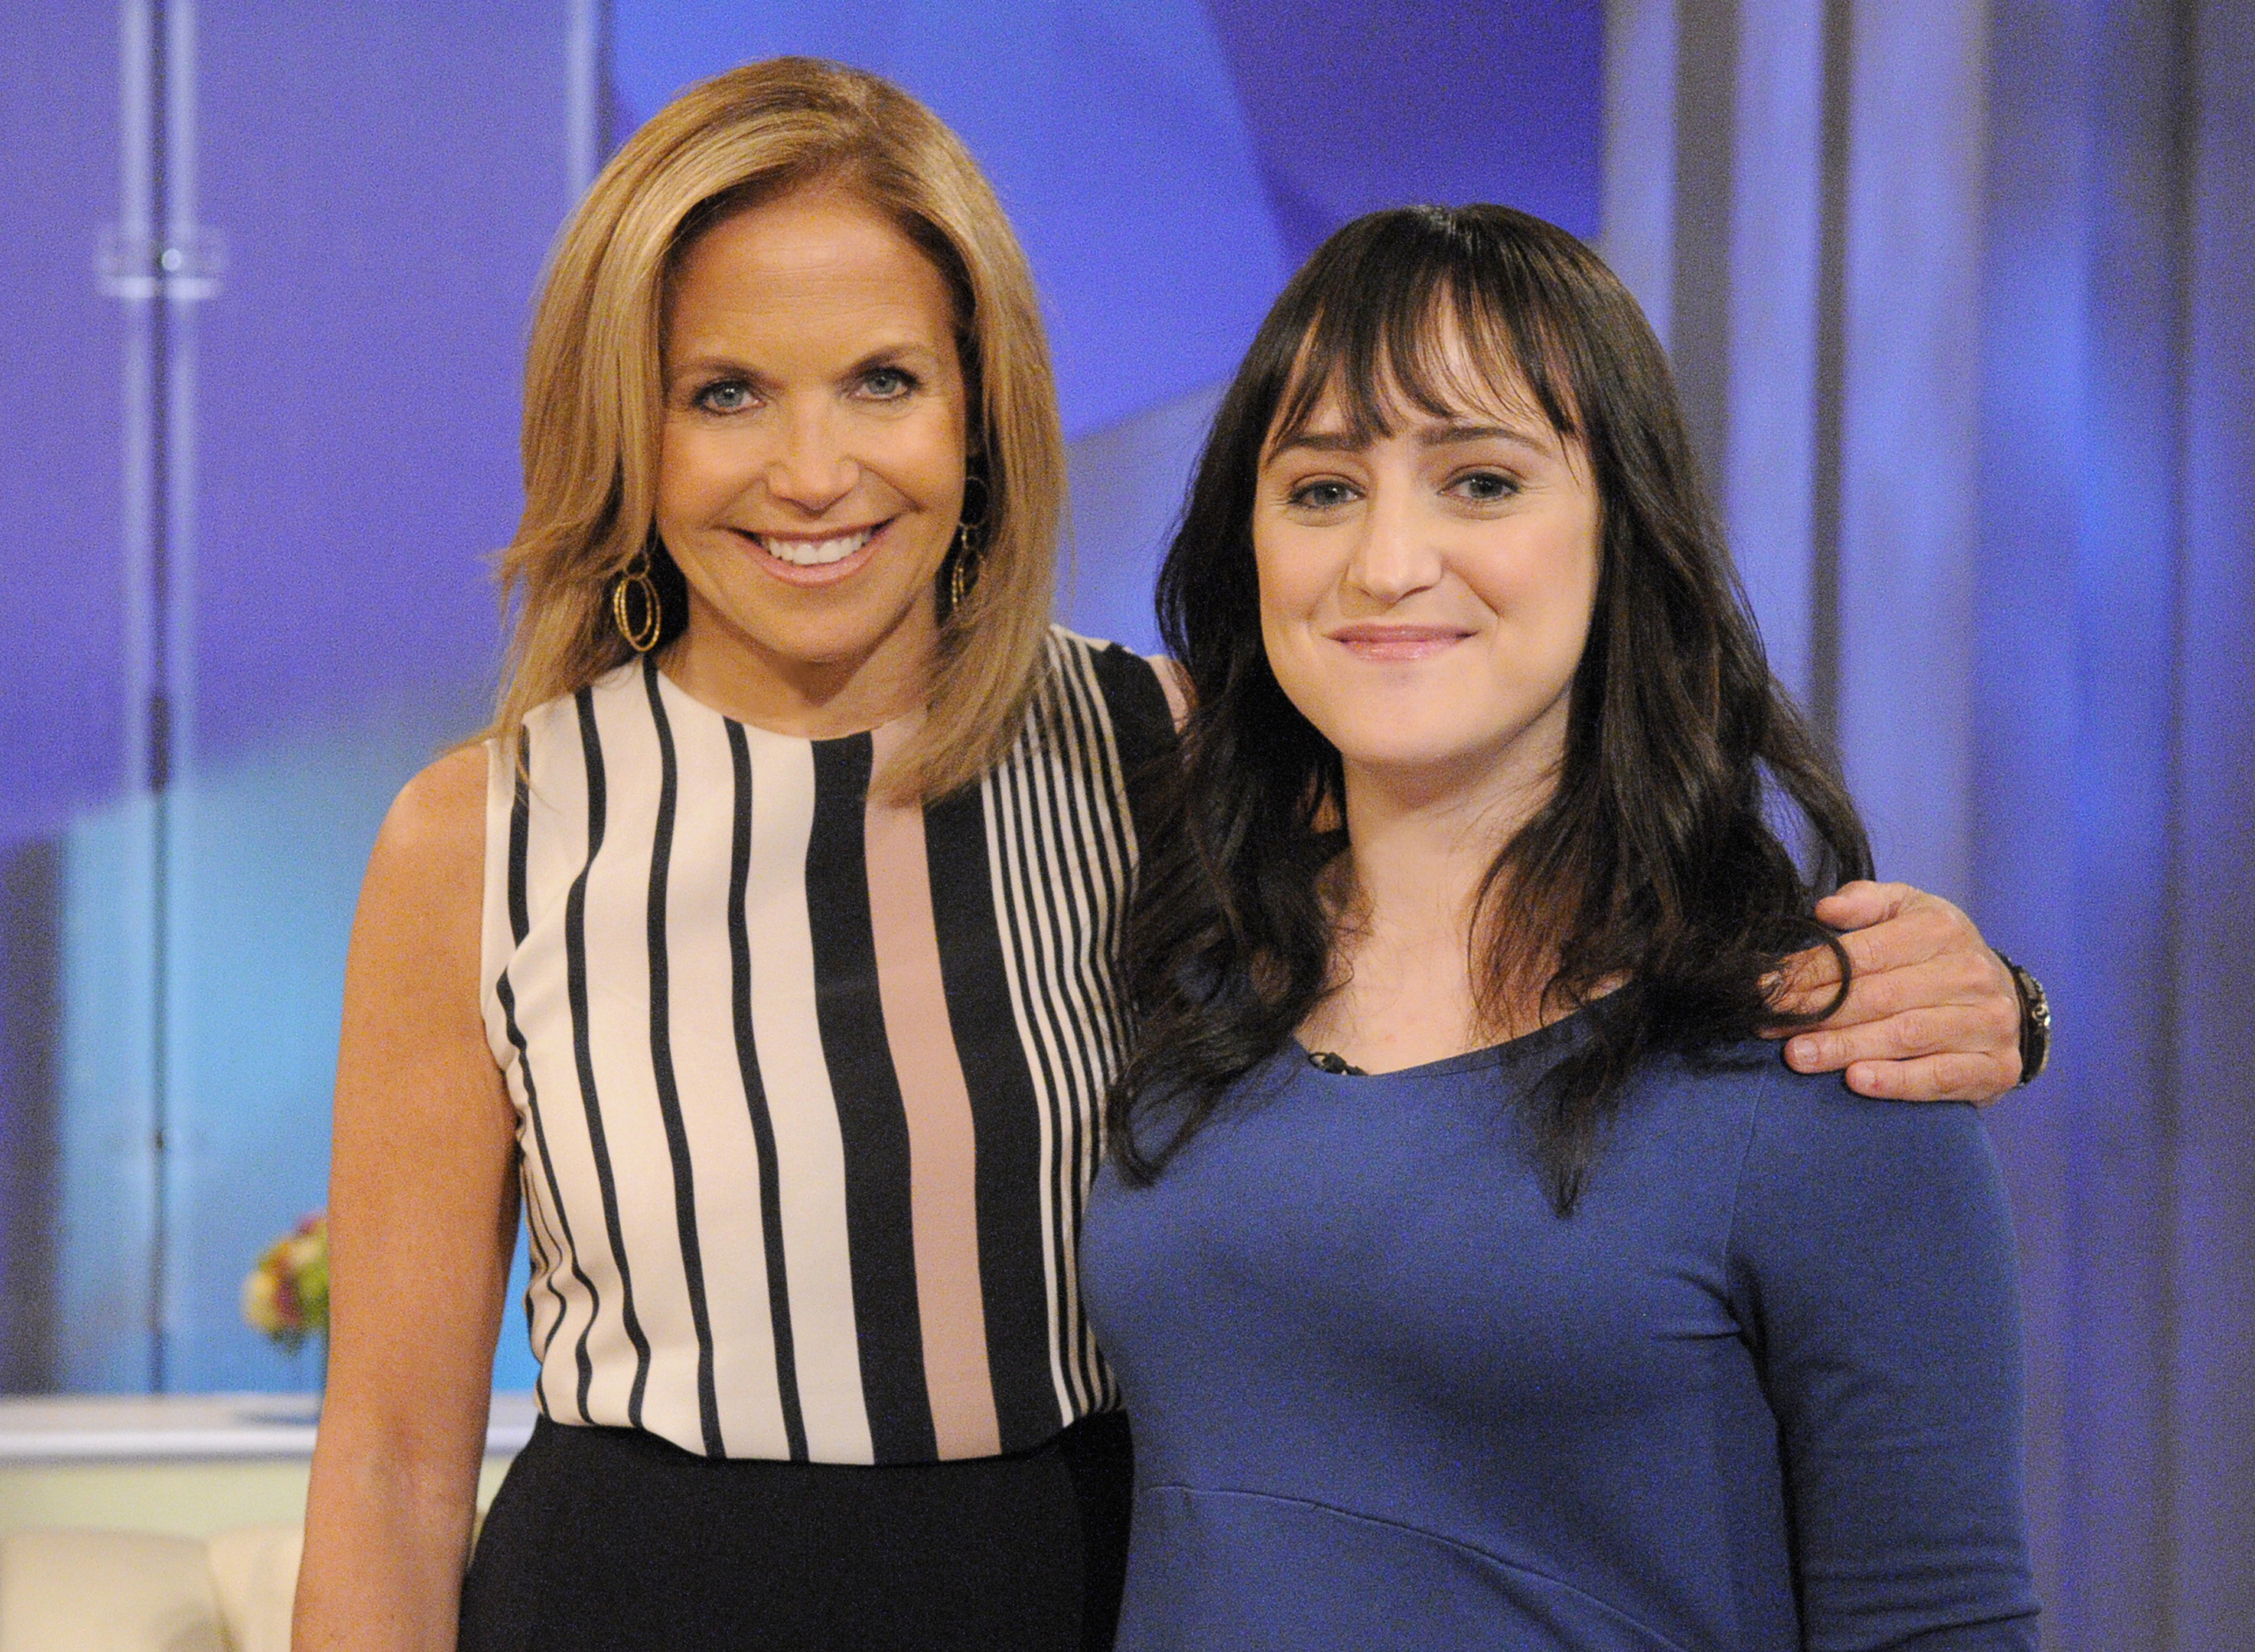 Katie Couric and Mara Wilson pictured on the set of ABC's "Katie" on May 29, 2013 | Source: Getty Images